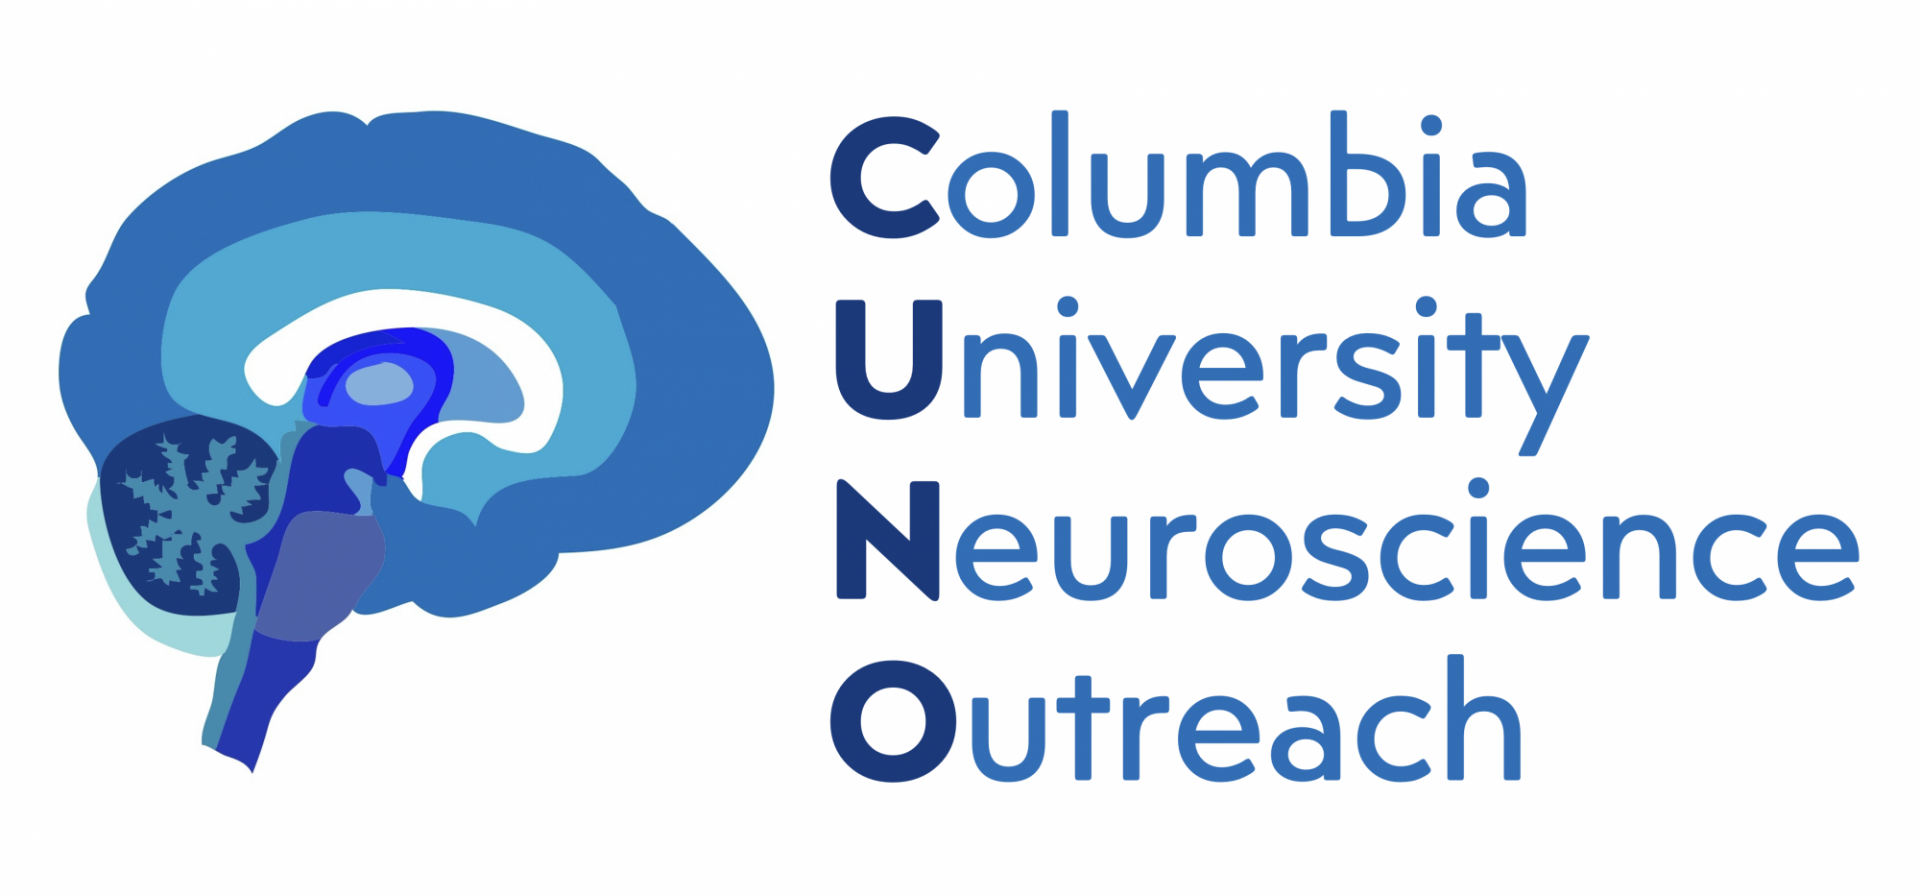 CUNO logo: blue schematic of the human brain with "Columbia University Neuroscience Outreach" written to the right